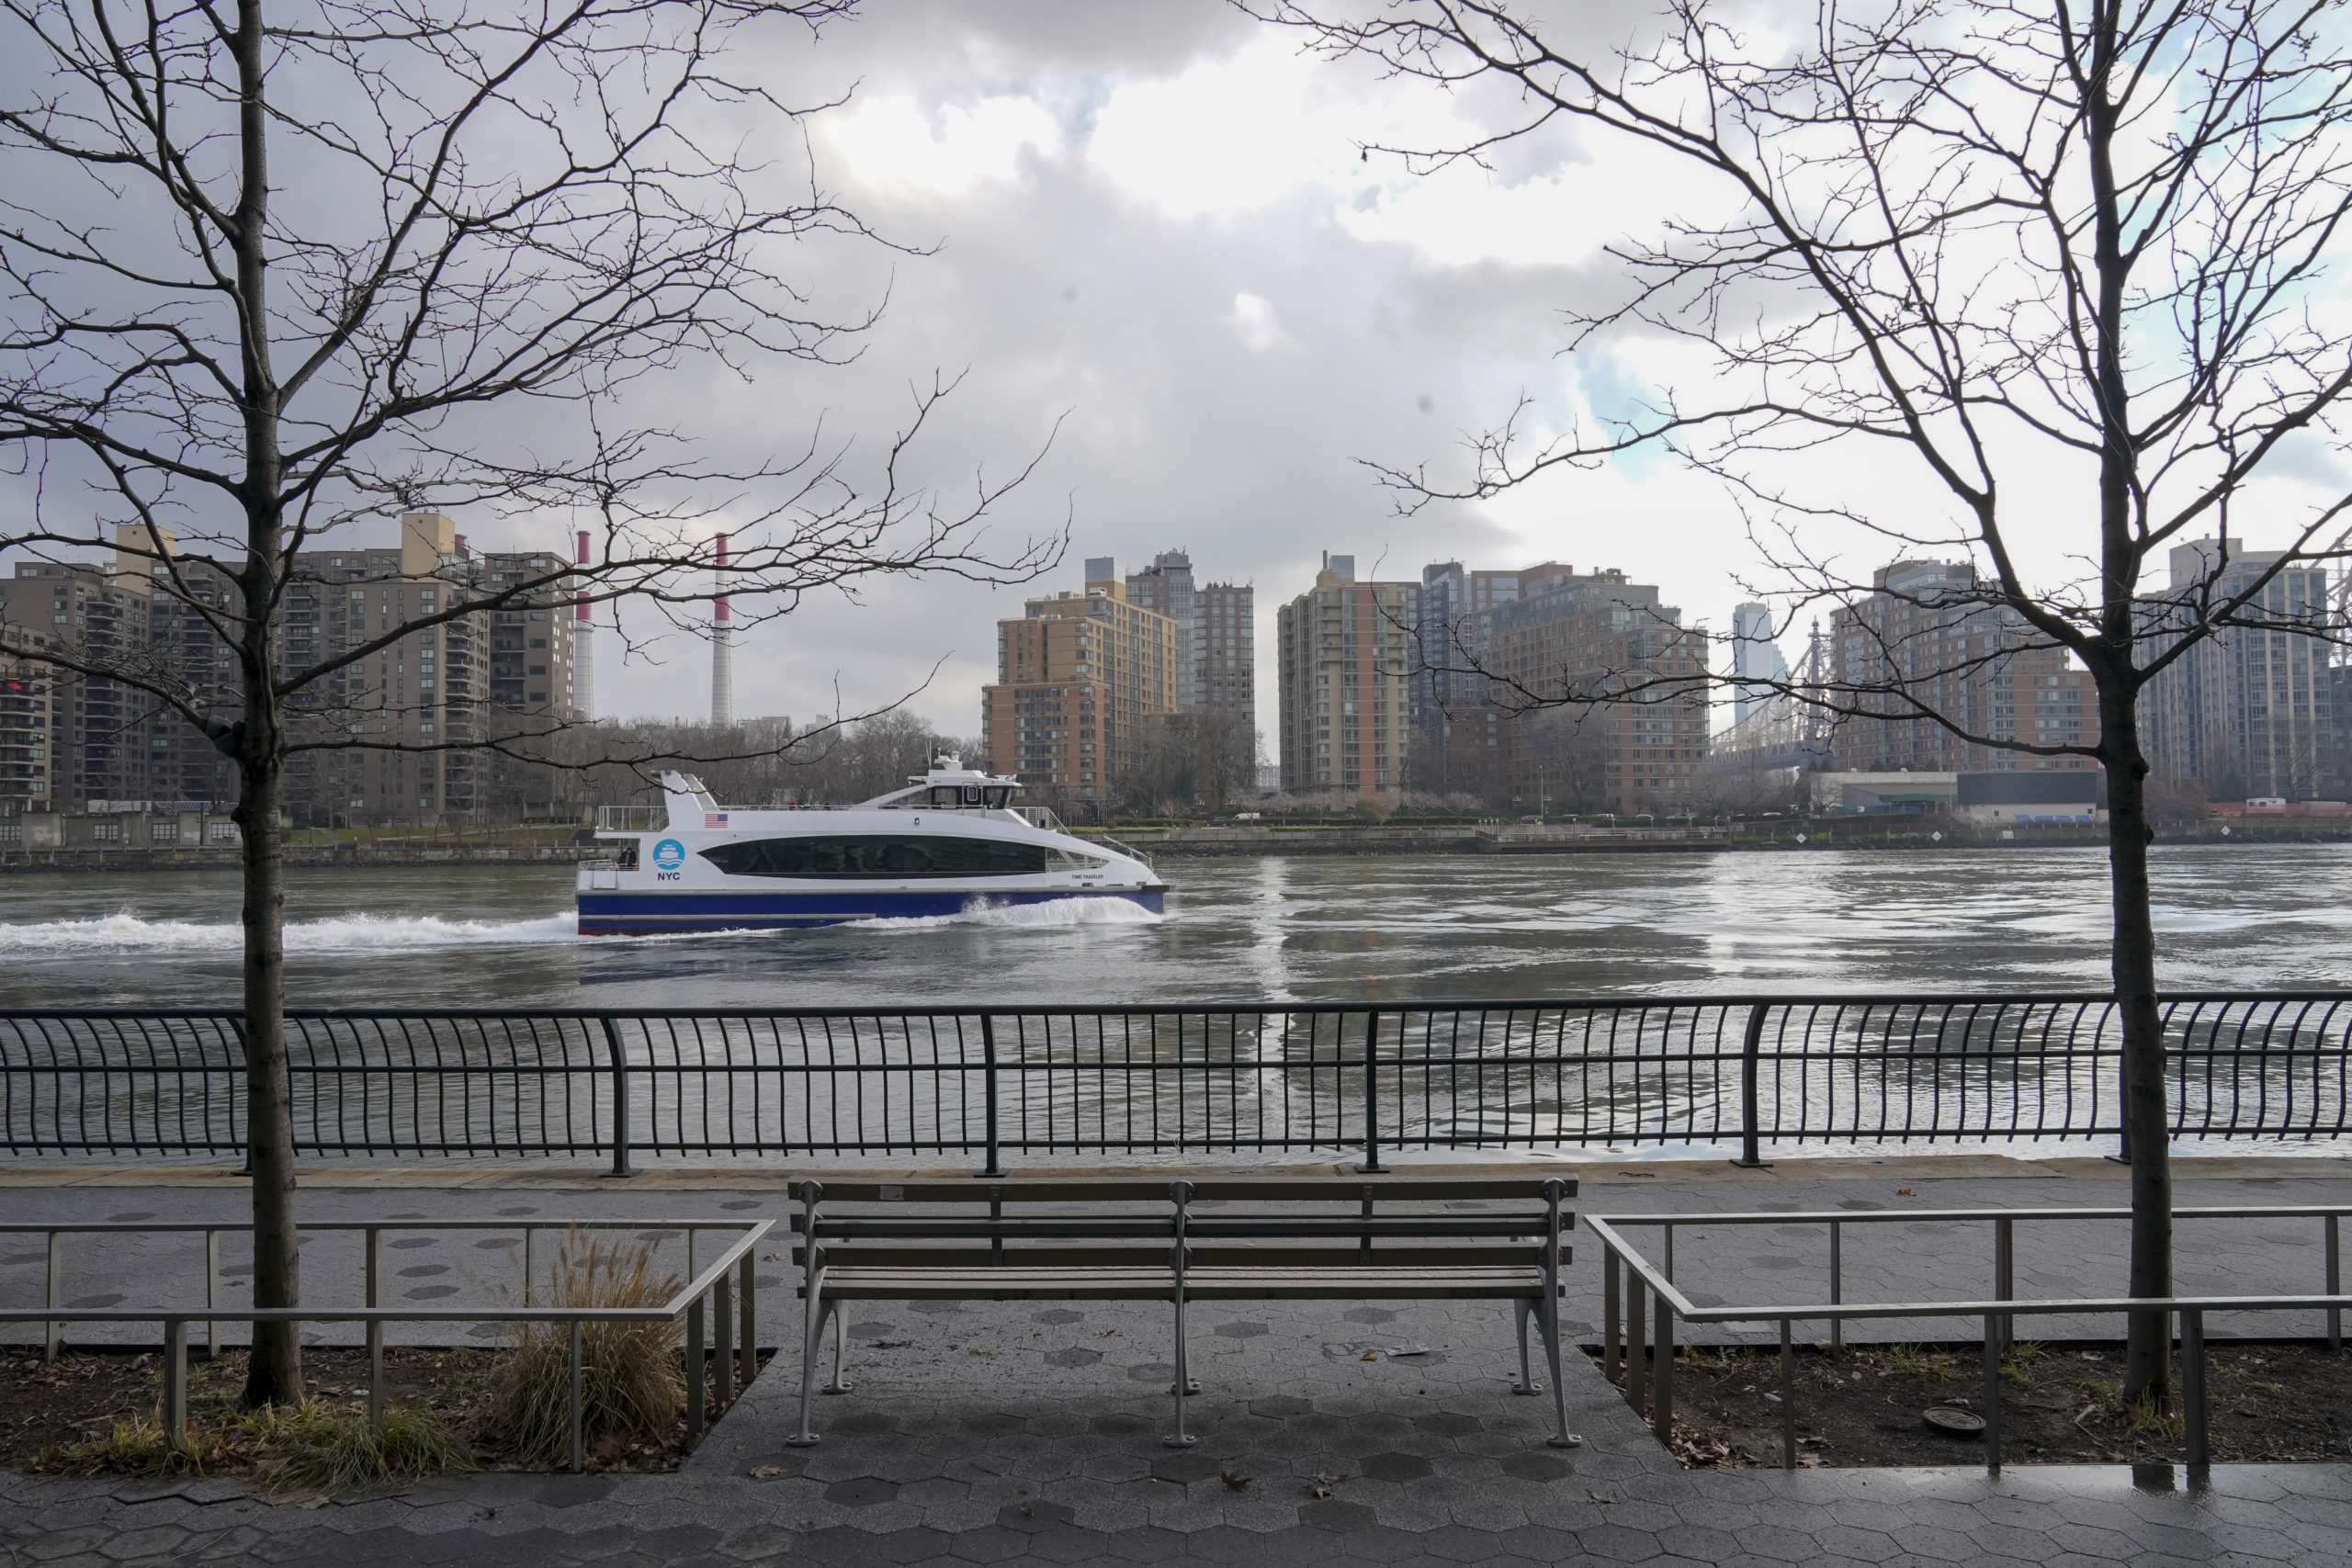 A commuter ferry travels down the East River on the Upper East Side of the Manhattan borough of New York City on Jan. 6. Woolly mammoth bones allegedly were dumped in the river in the 1940s.